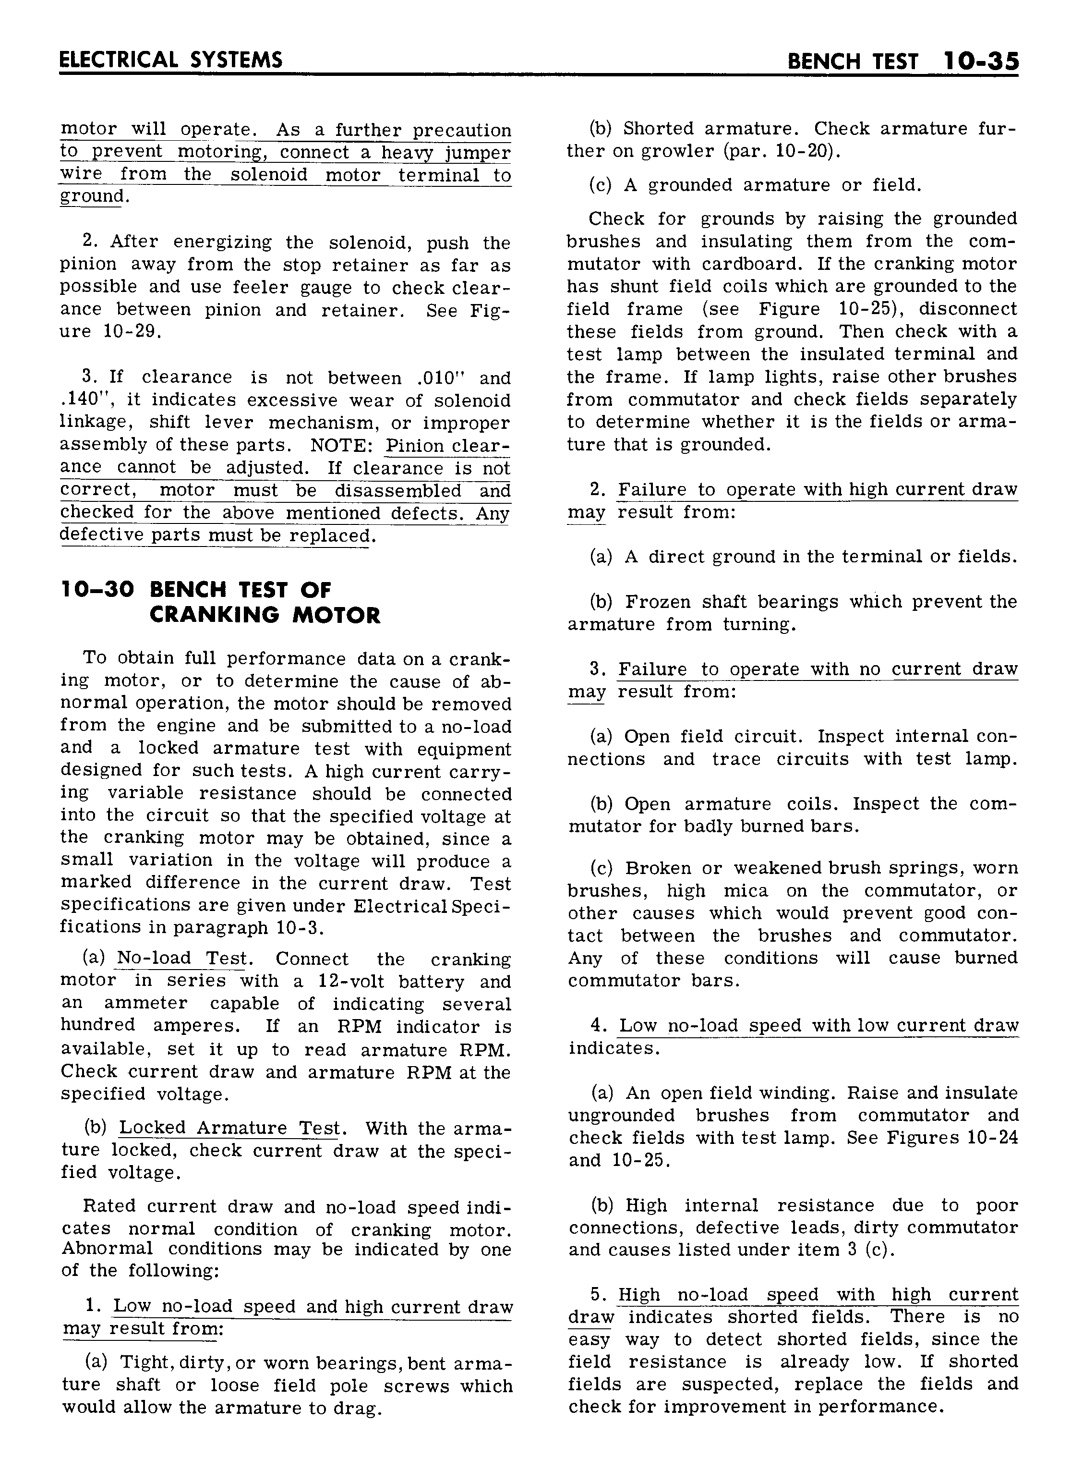 n_10 1961 Buick Shop Manual - Electrical Systems-035-035.jpg